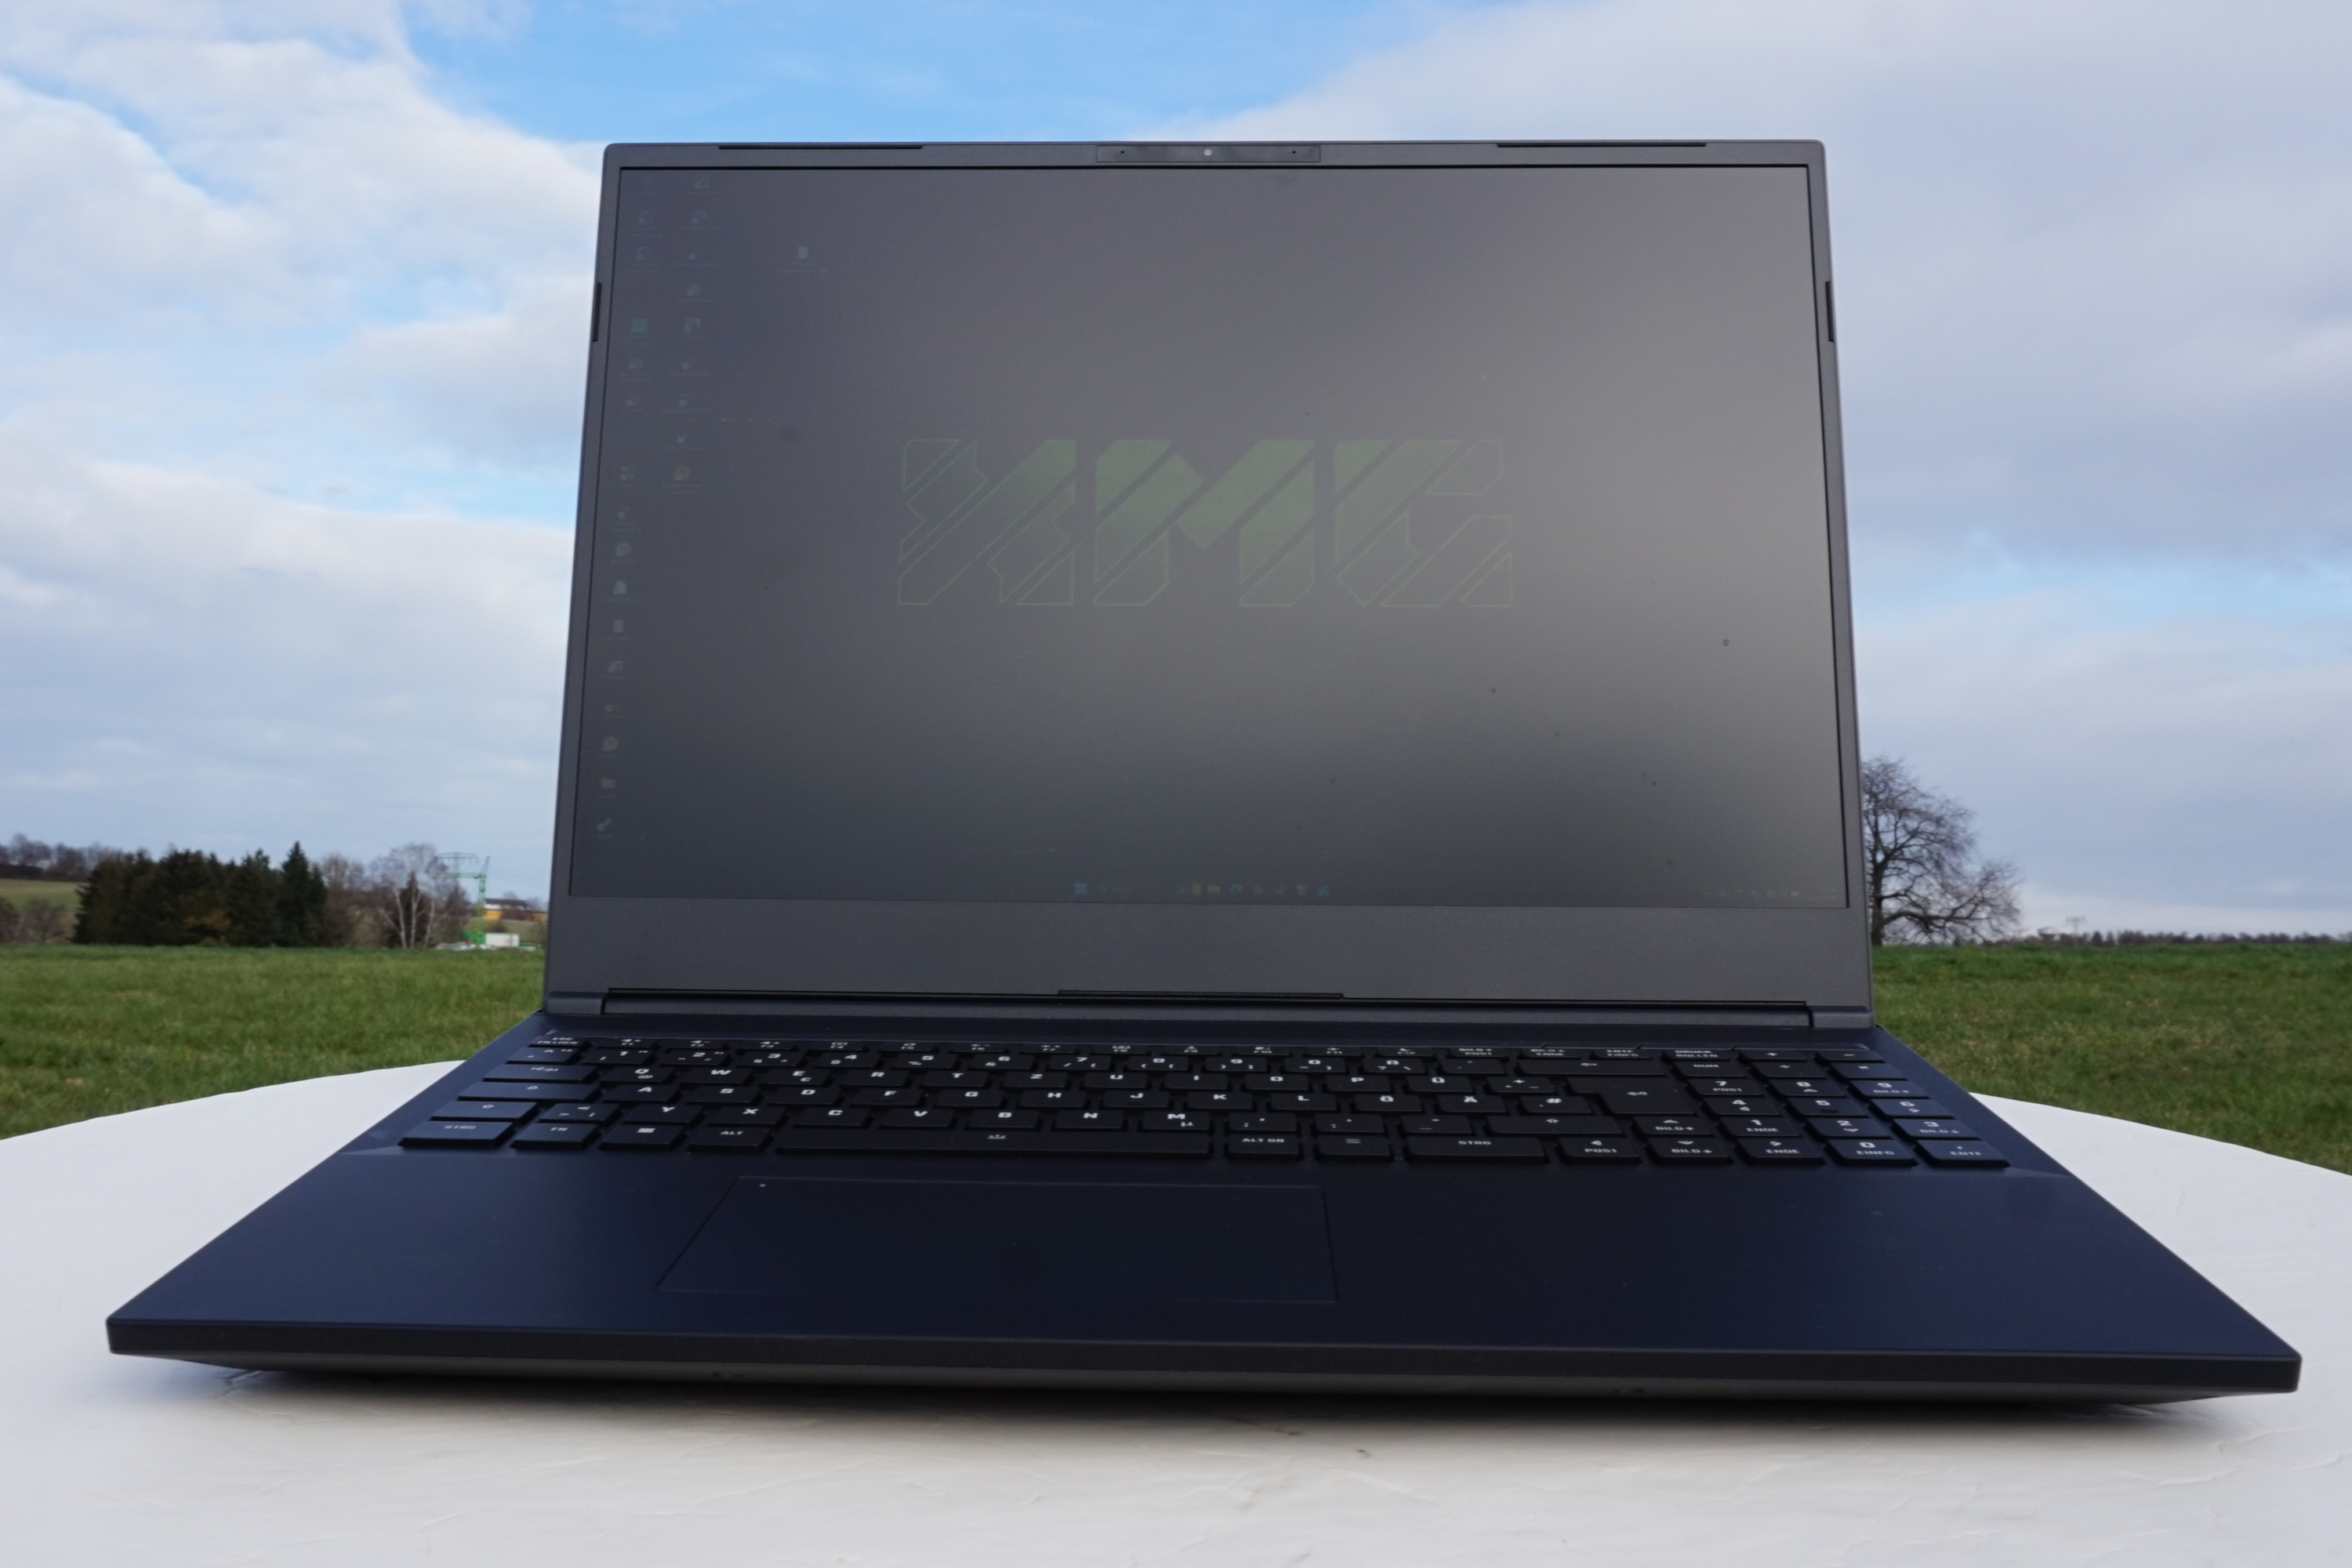 Schenker XMG Neo 16 E23 in laptop test: with RTX 4090 on the gaming throne